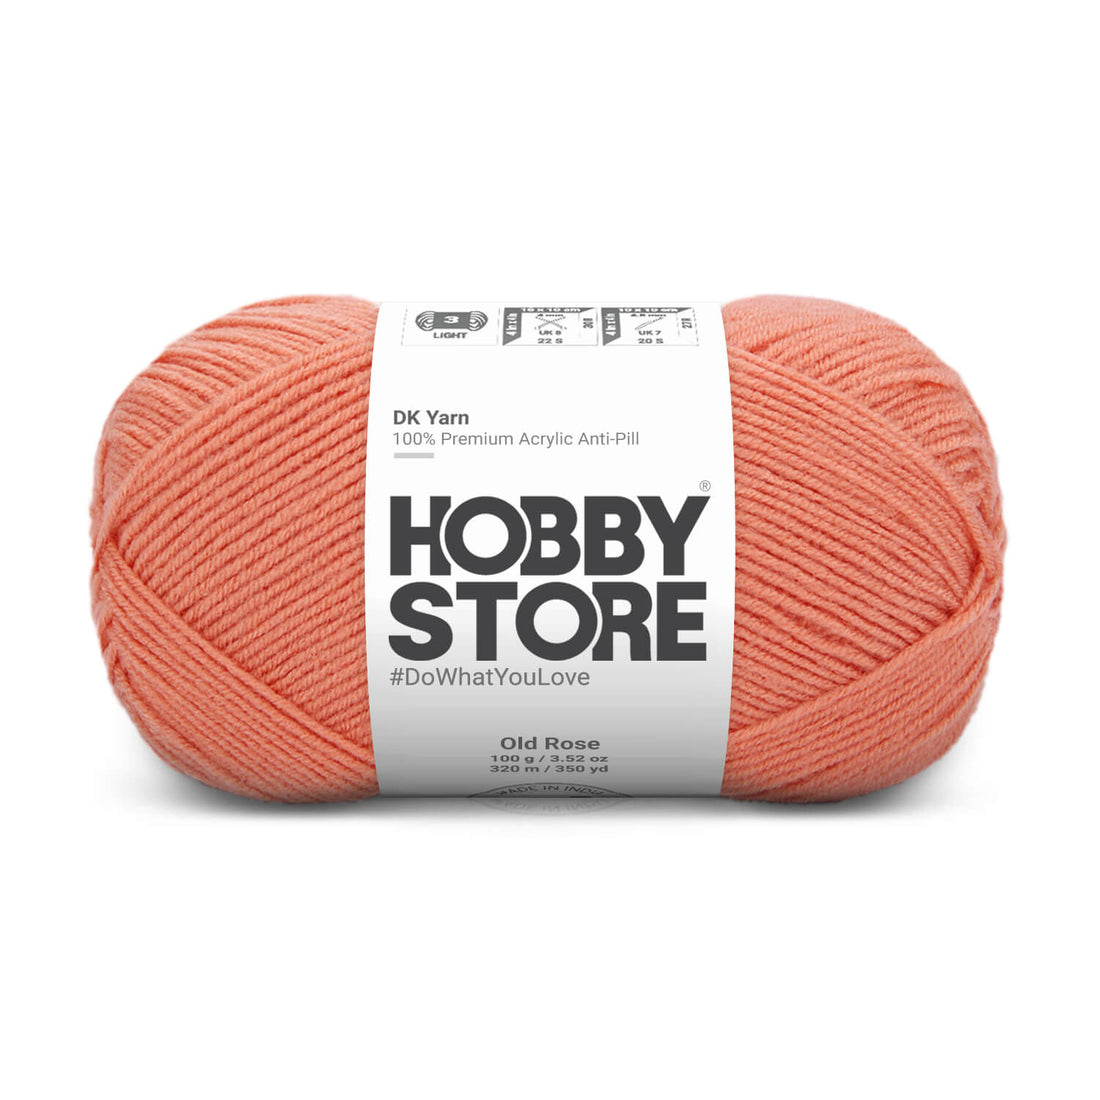 DK Anti-Pill Yarn by Hobby Store - Old Rose 5011